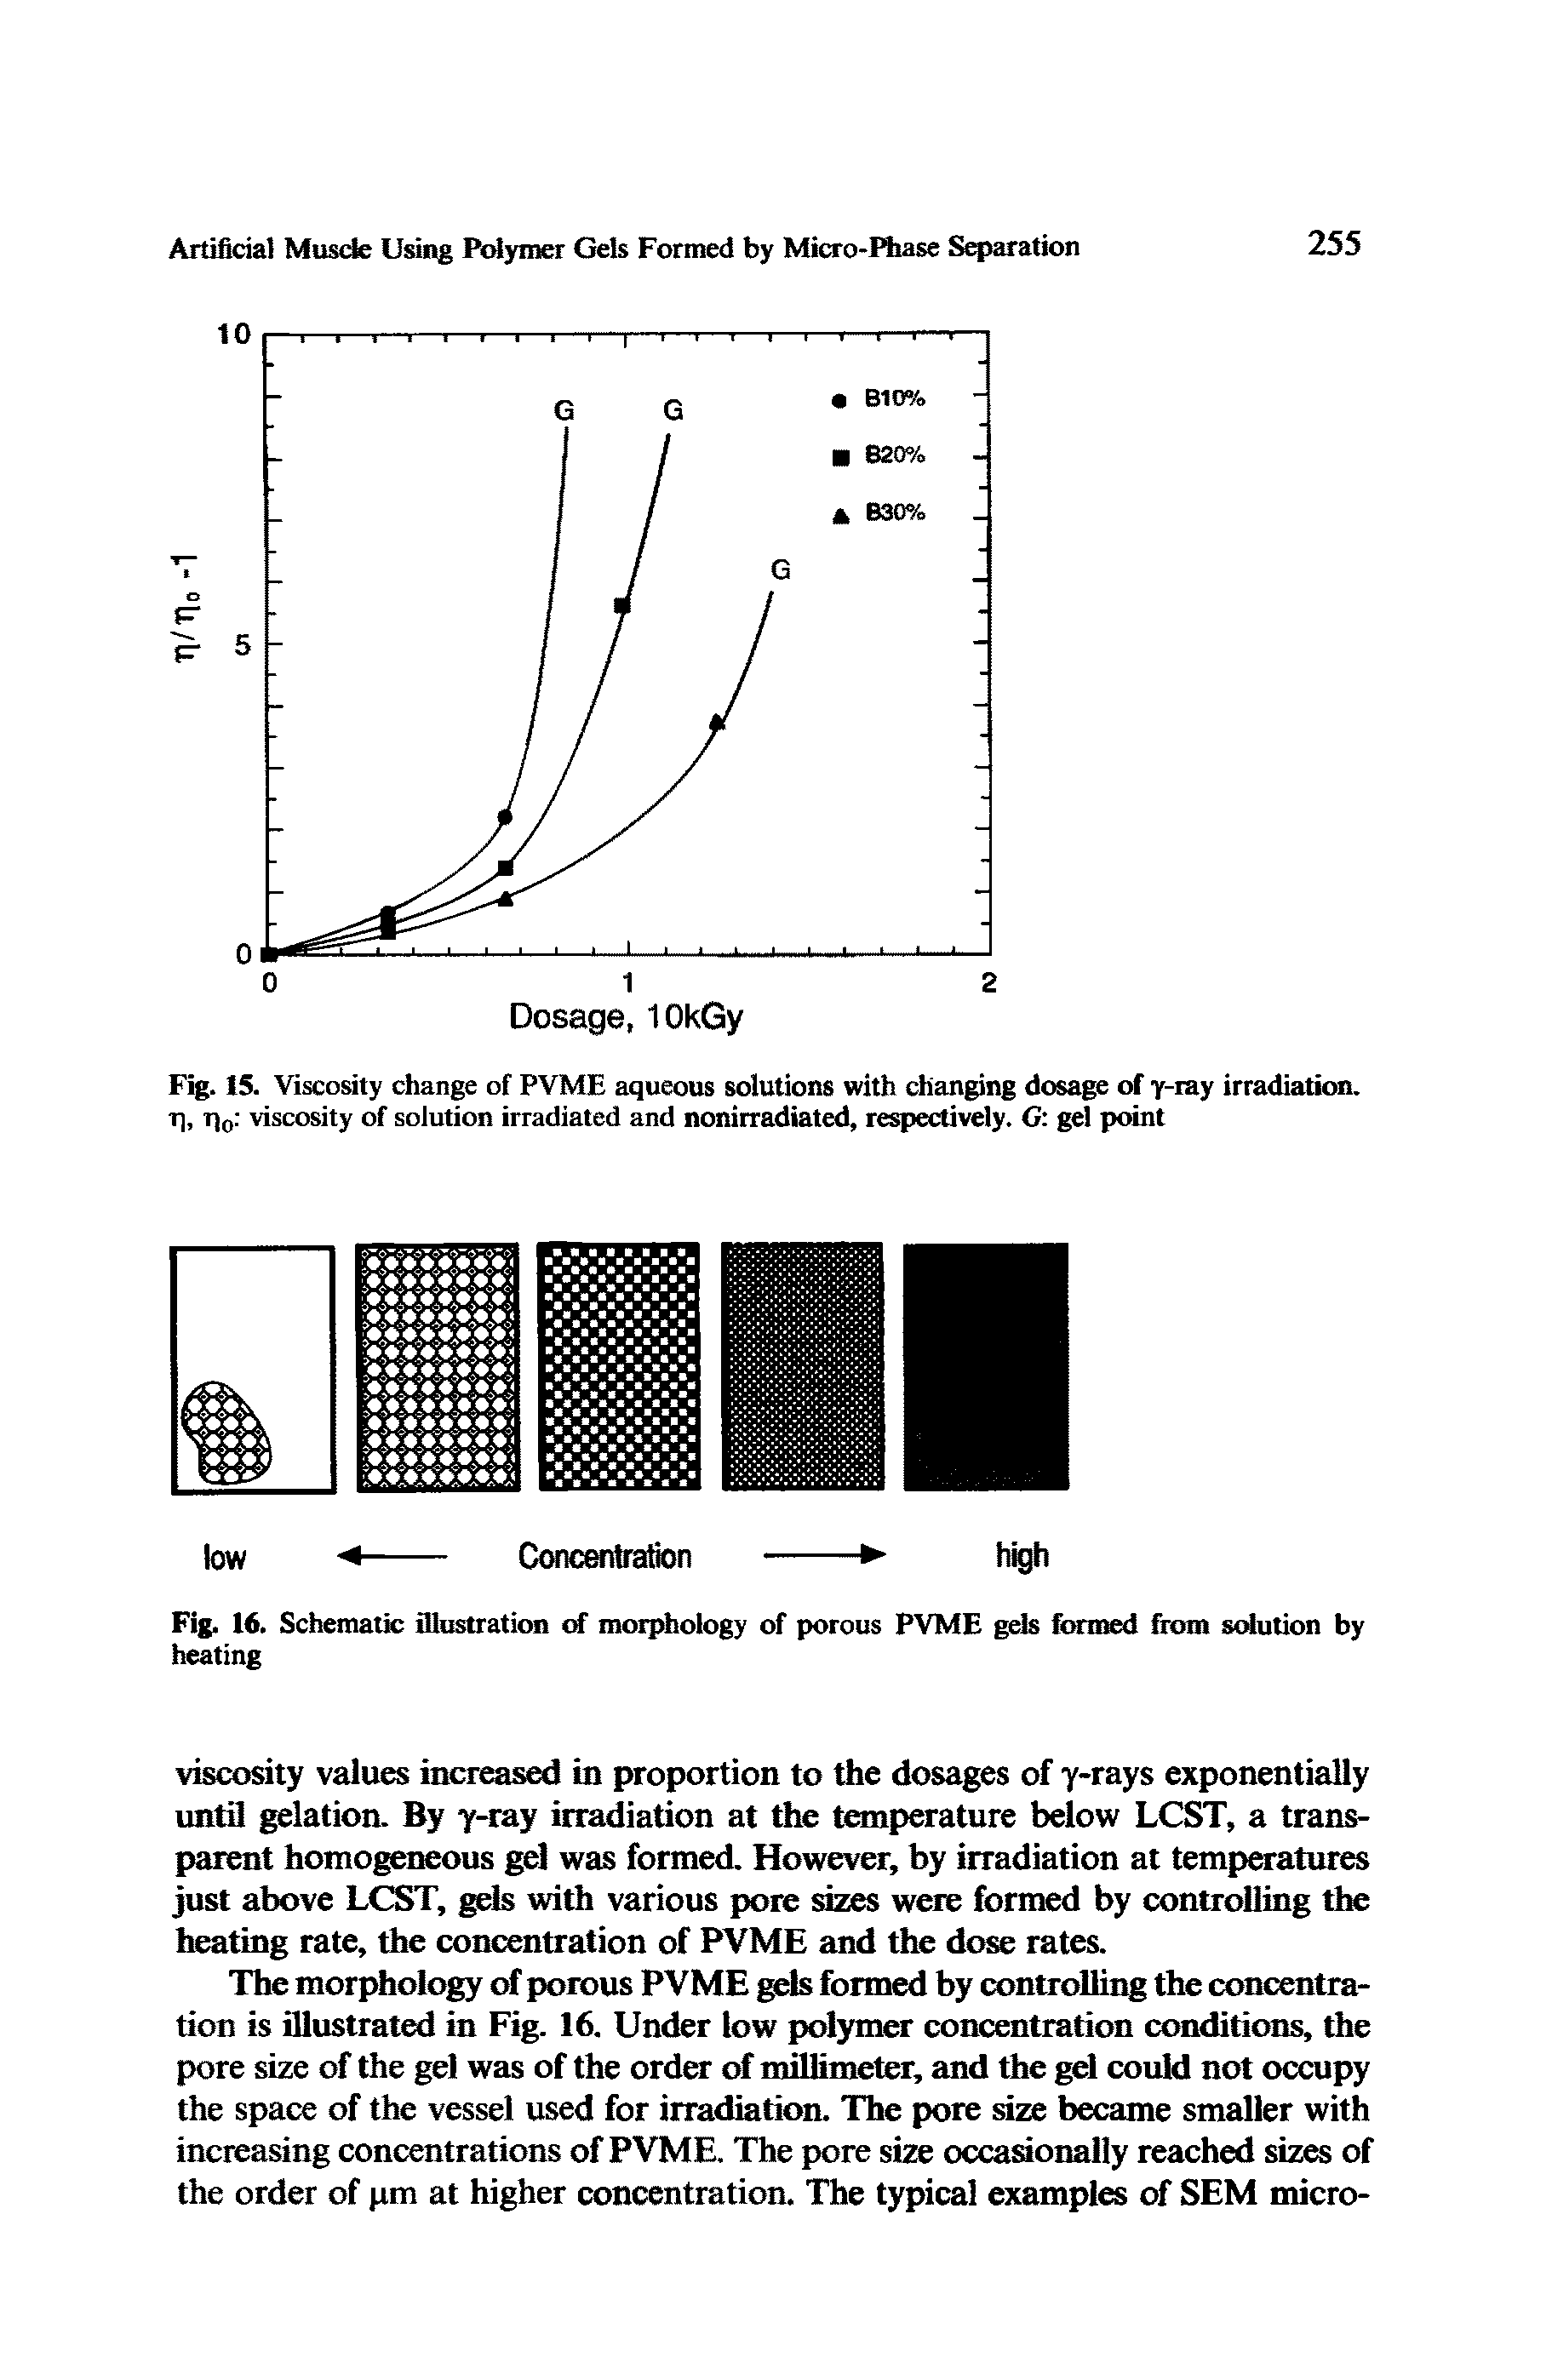 Fig. 15. Viscosity change of PVME aqueous solutions with changing dosage of y-ray irradiation. t), rj0 viscosity of solution irradiated and nonirradiated, respectively. G gel point...